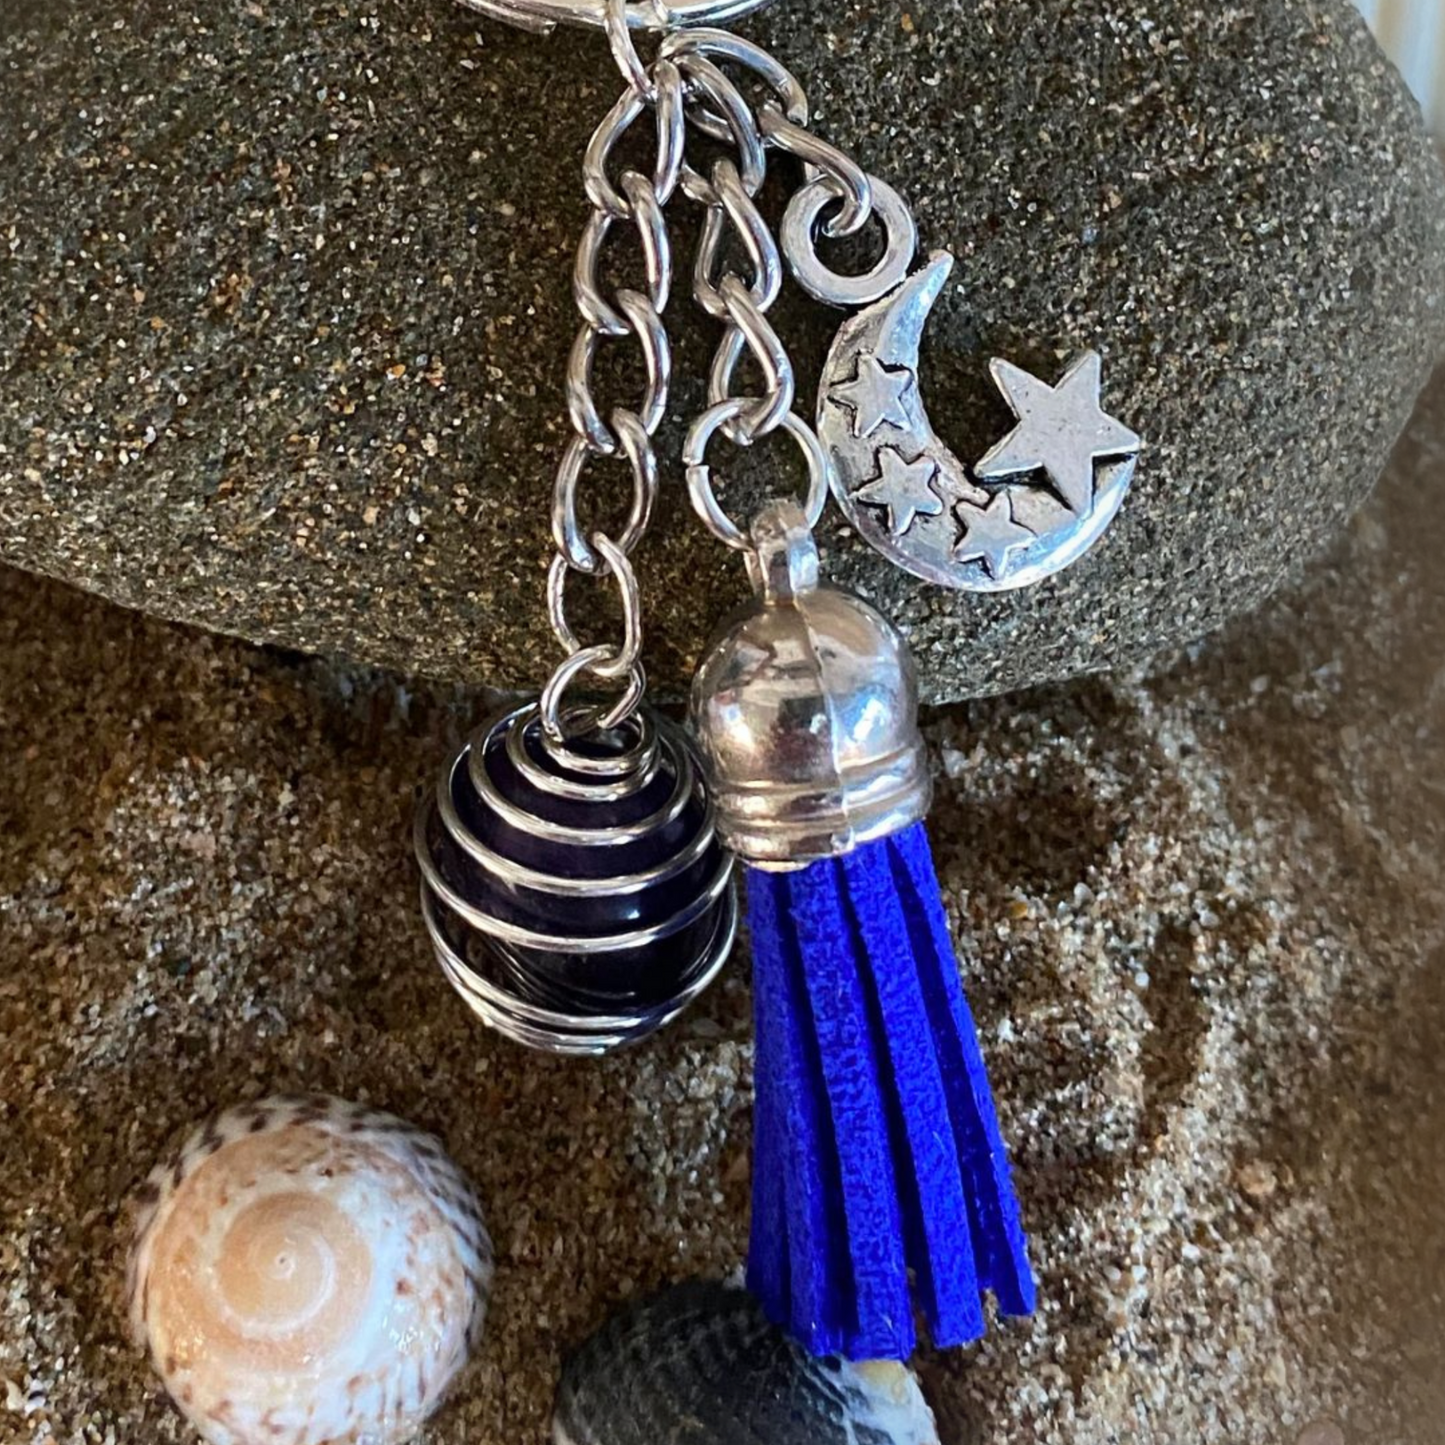 Spiral Cage Keyring with Amethyst Tumble Stone, Royal Blue Tassel and Charm